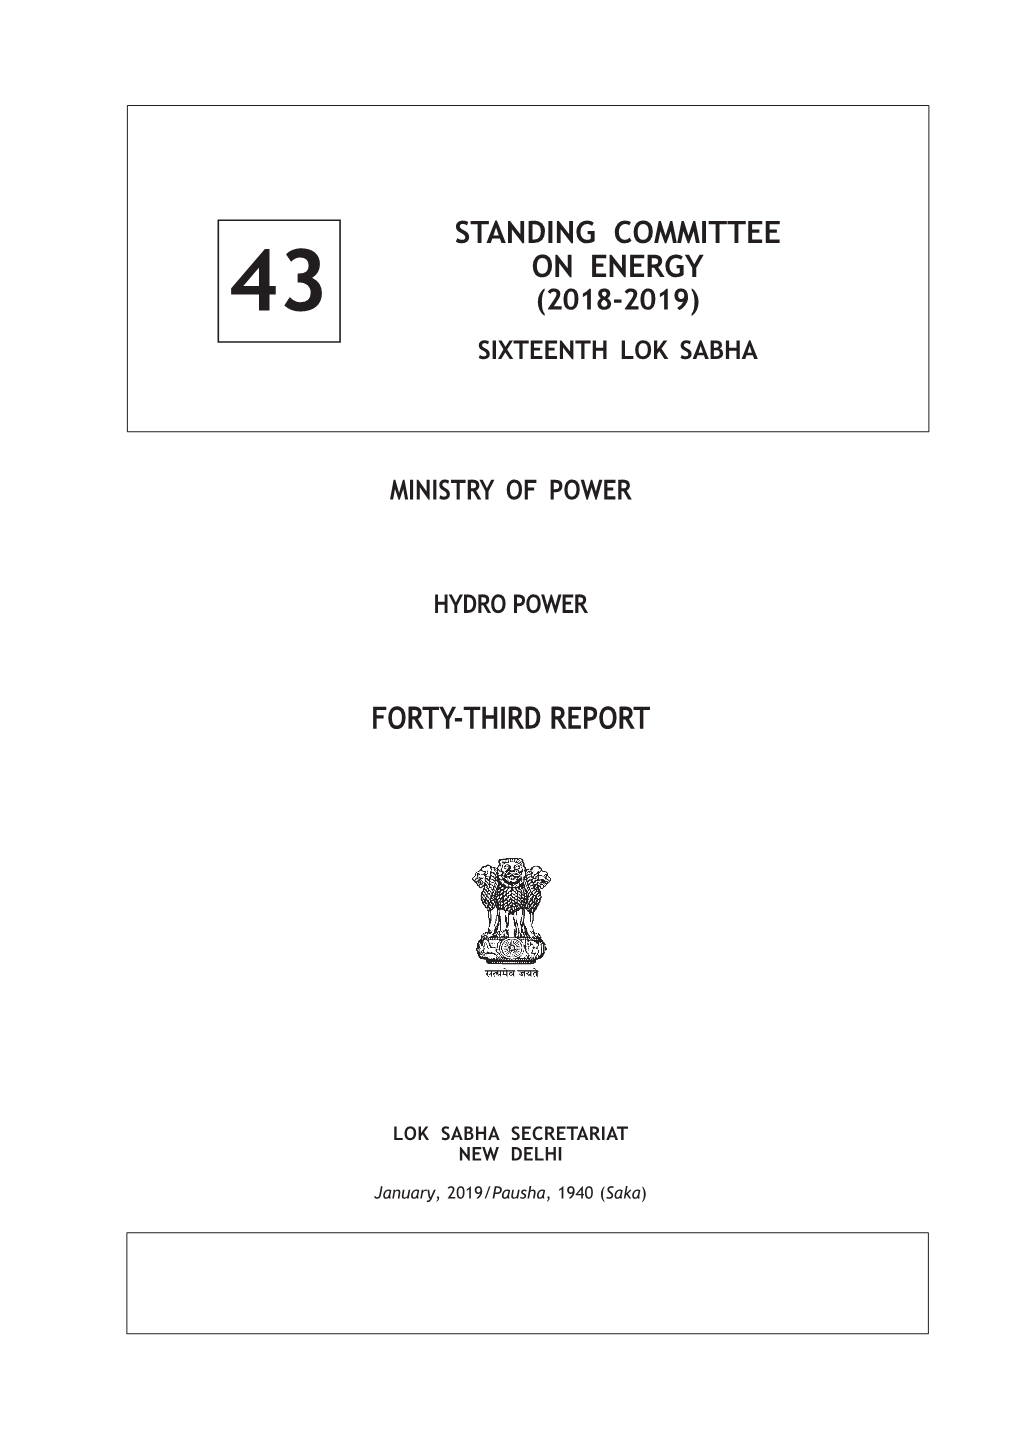 Standing Committee on Energy Forty-Third Report